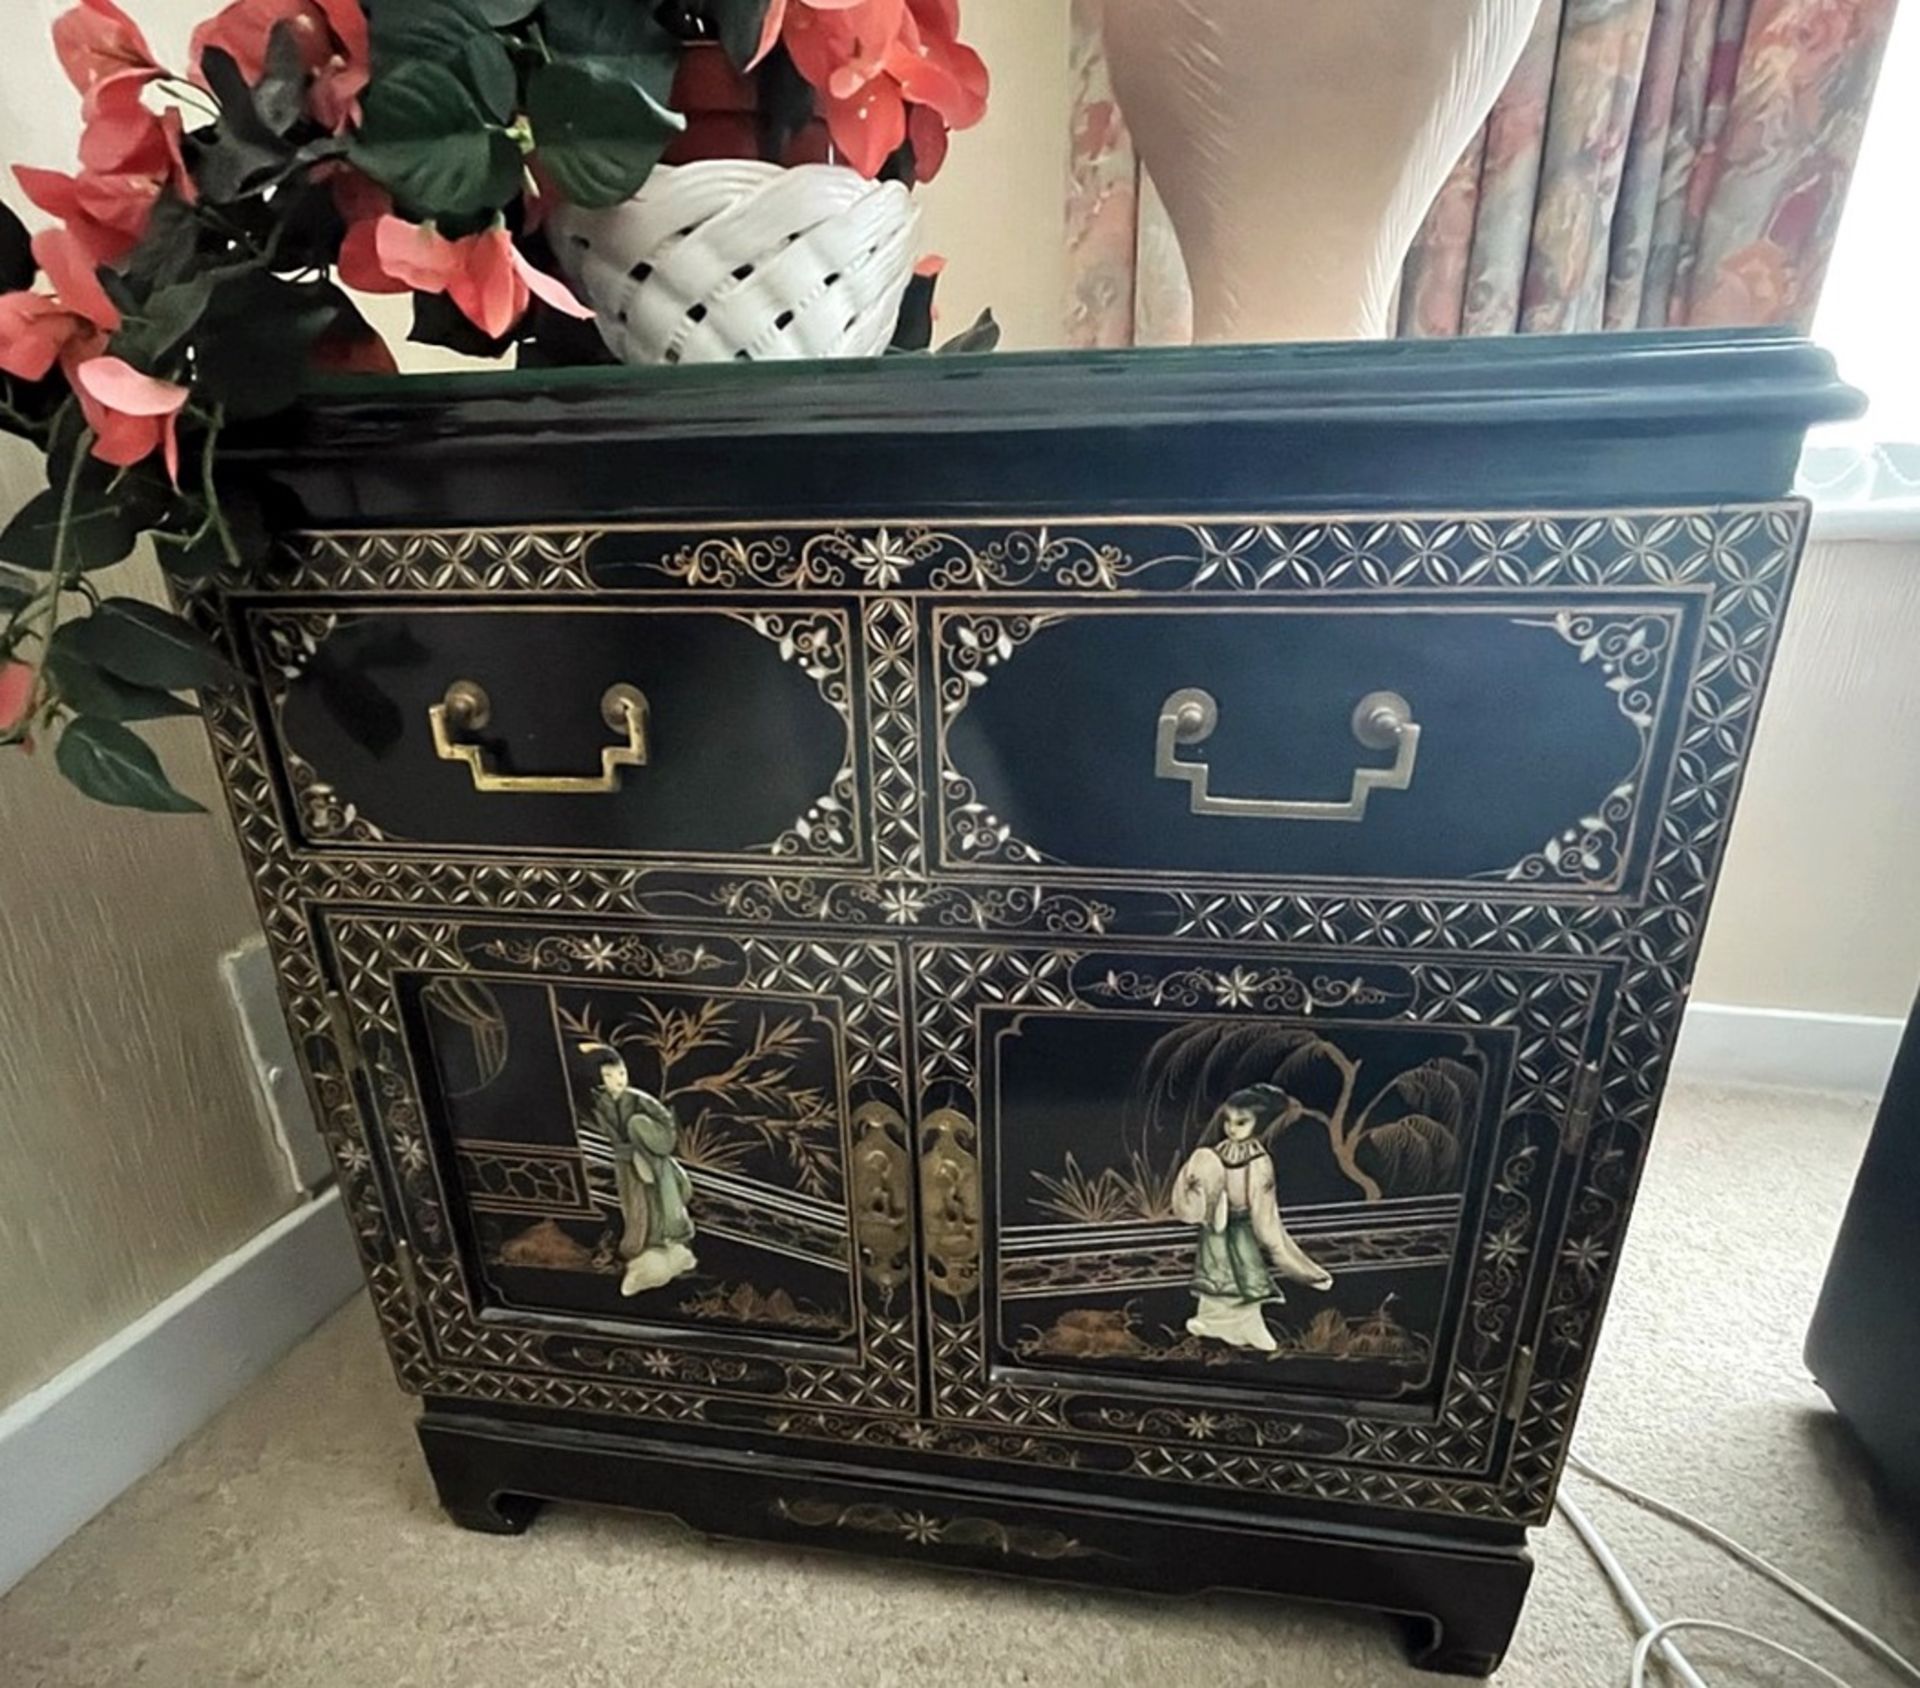 1 x Vintage Chinese Glass Topped Unit Featuring Embosed Figures - Dimensions: 61 x 40 x H60cm